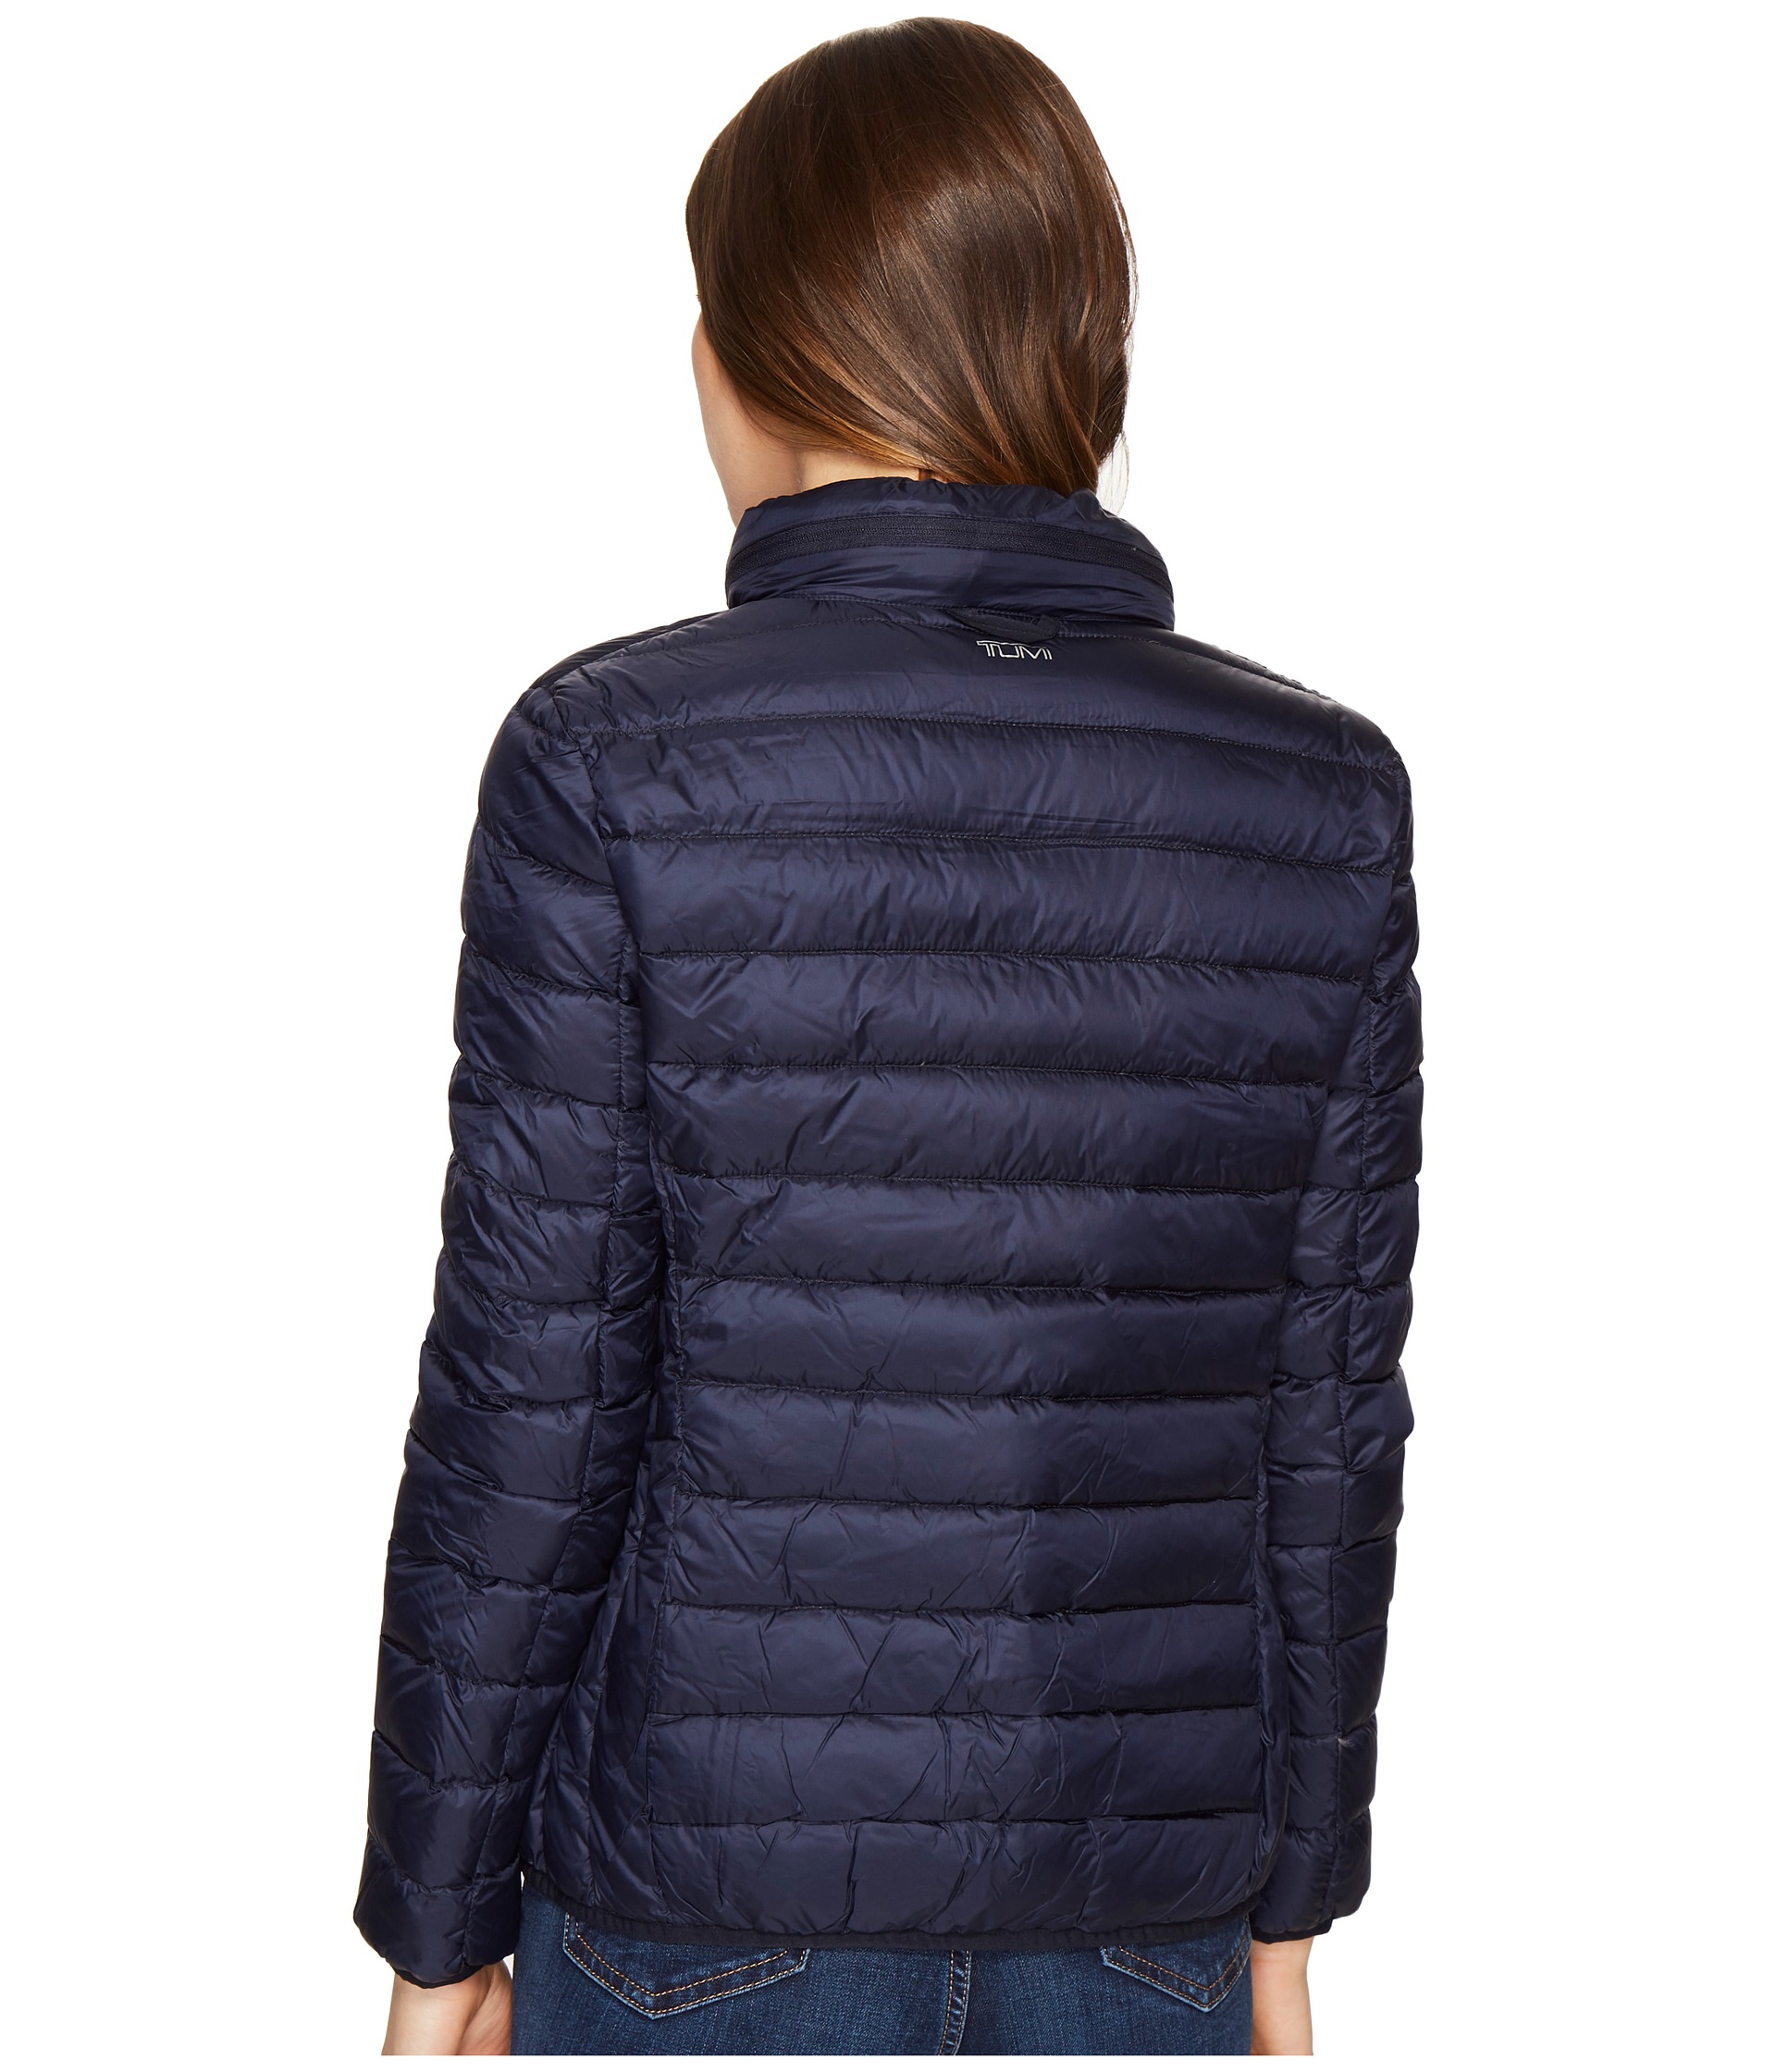 Tumi Clairmont Packable Travel Puffer Jacket at Zappos.com